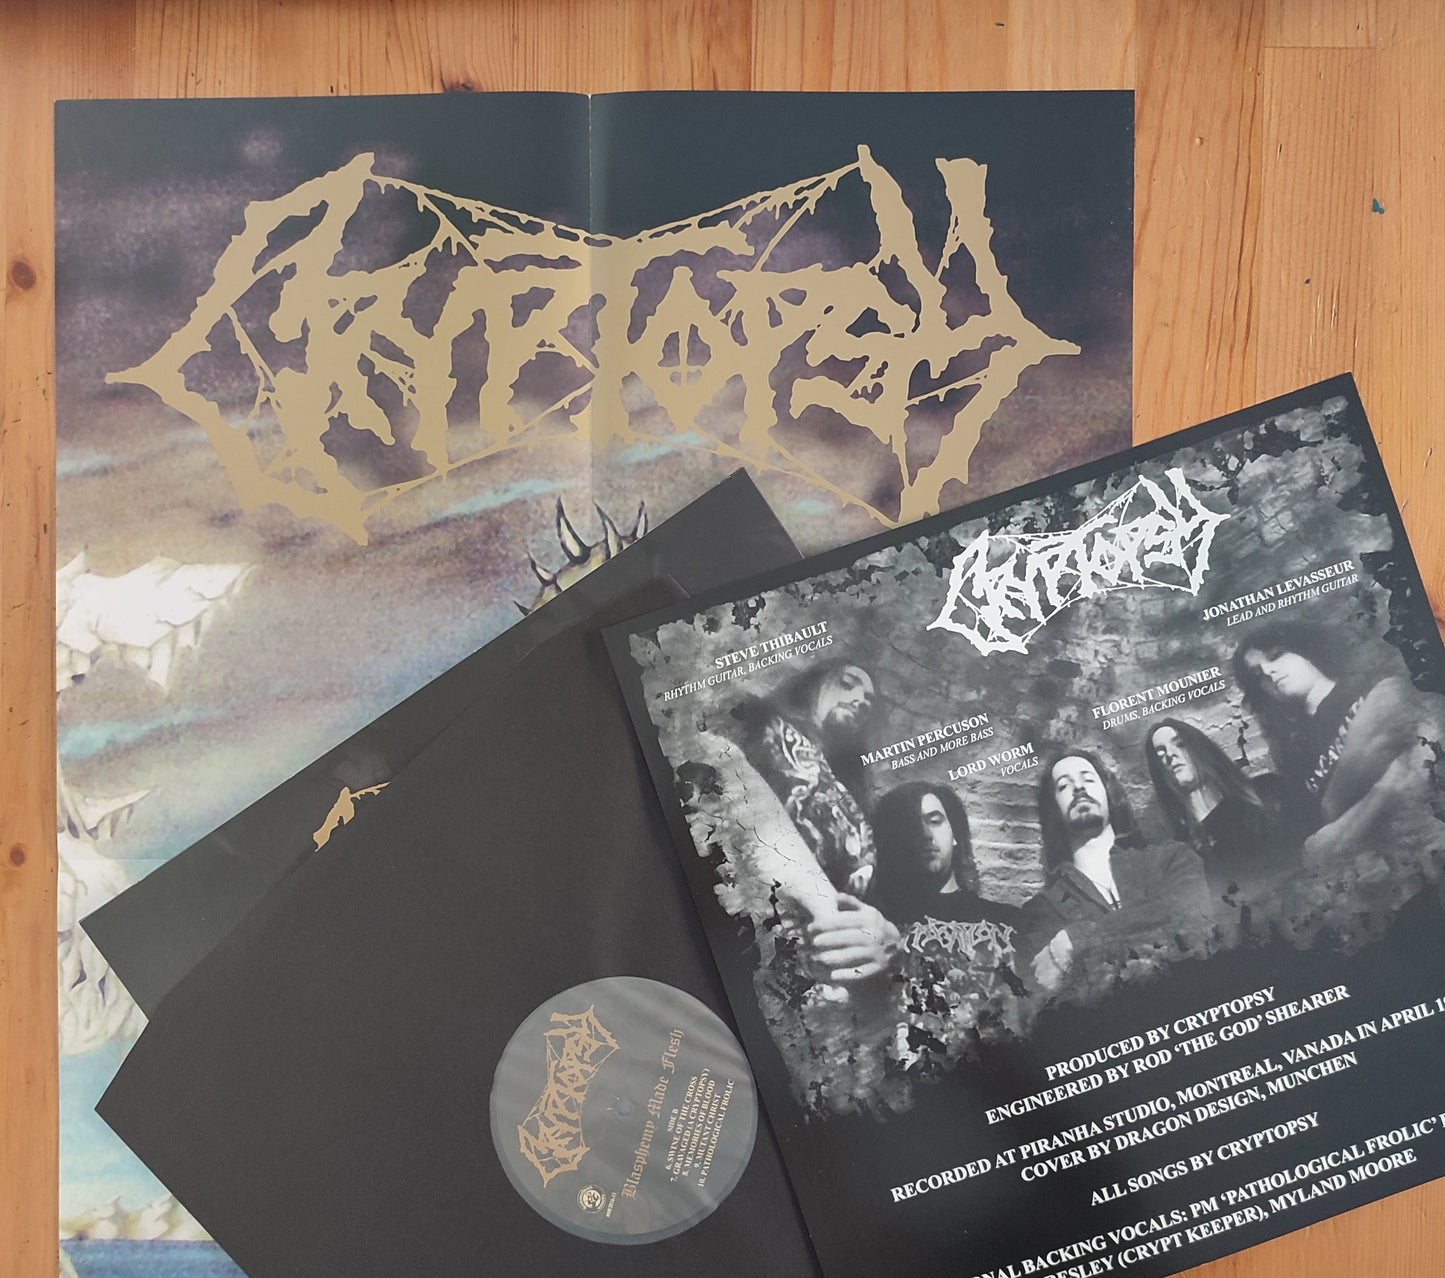 Cryptopsy (Can) "Blasphemy Made Flesh" - 12" LP ***New in stock***